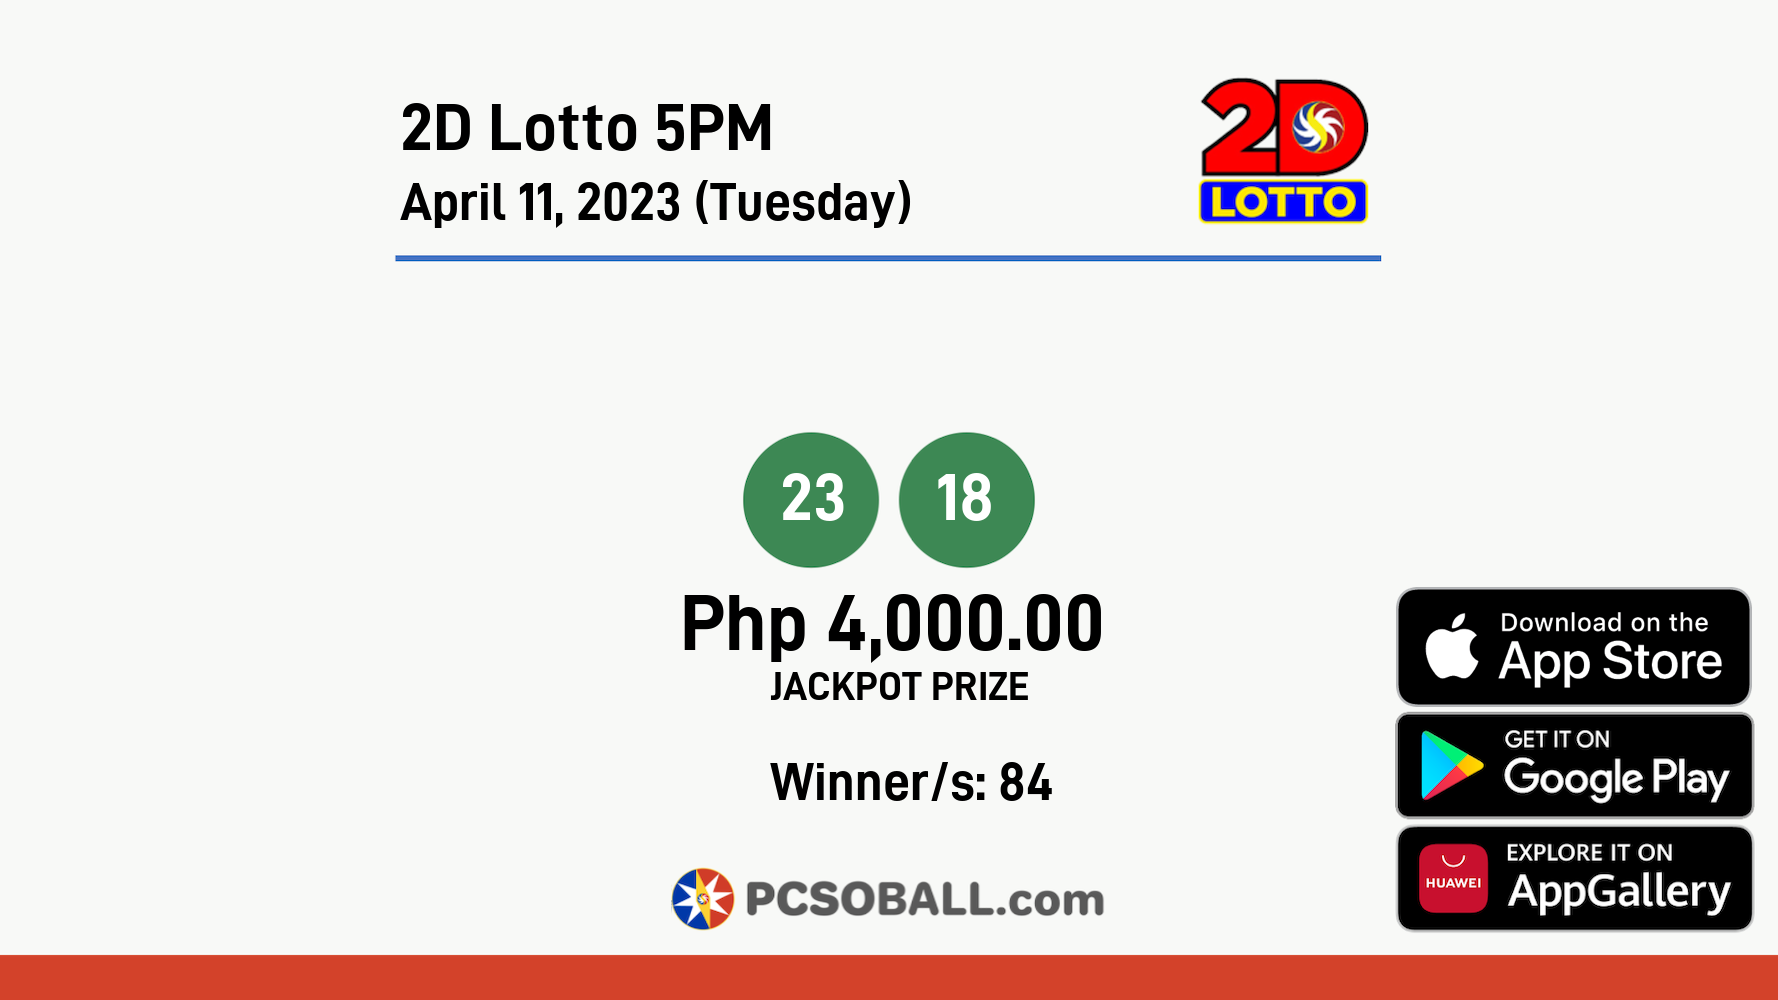 2D Lotto 5PM April 11, 2023 (Tuesday) Result